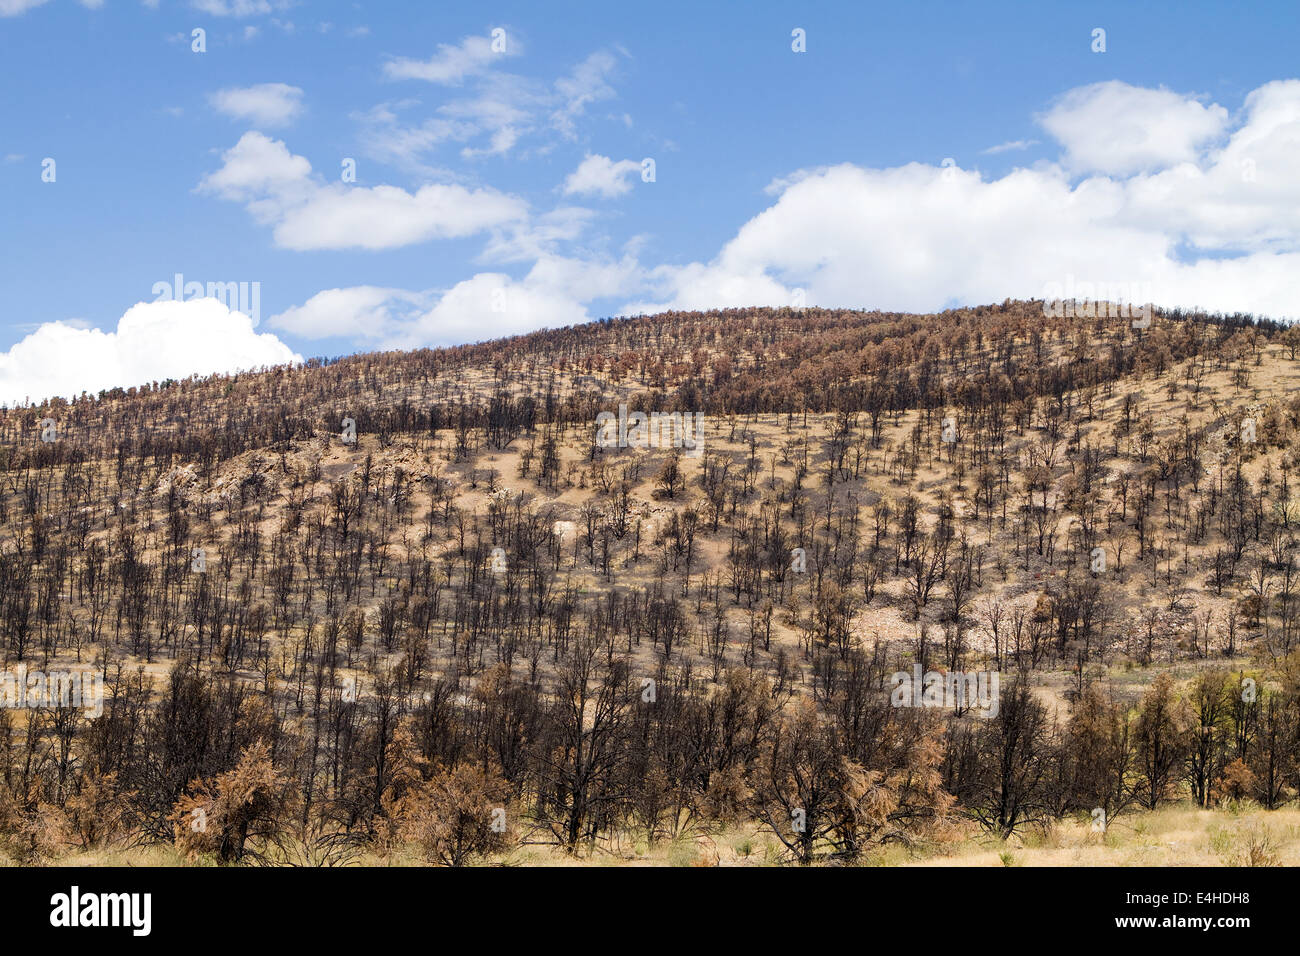 Dry burnt California hillside charred and devastated by a forest wildfire. Stock Photo